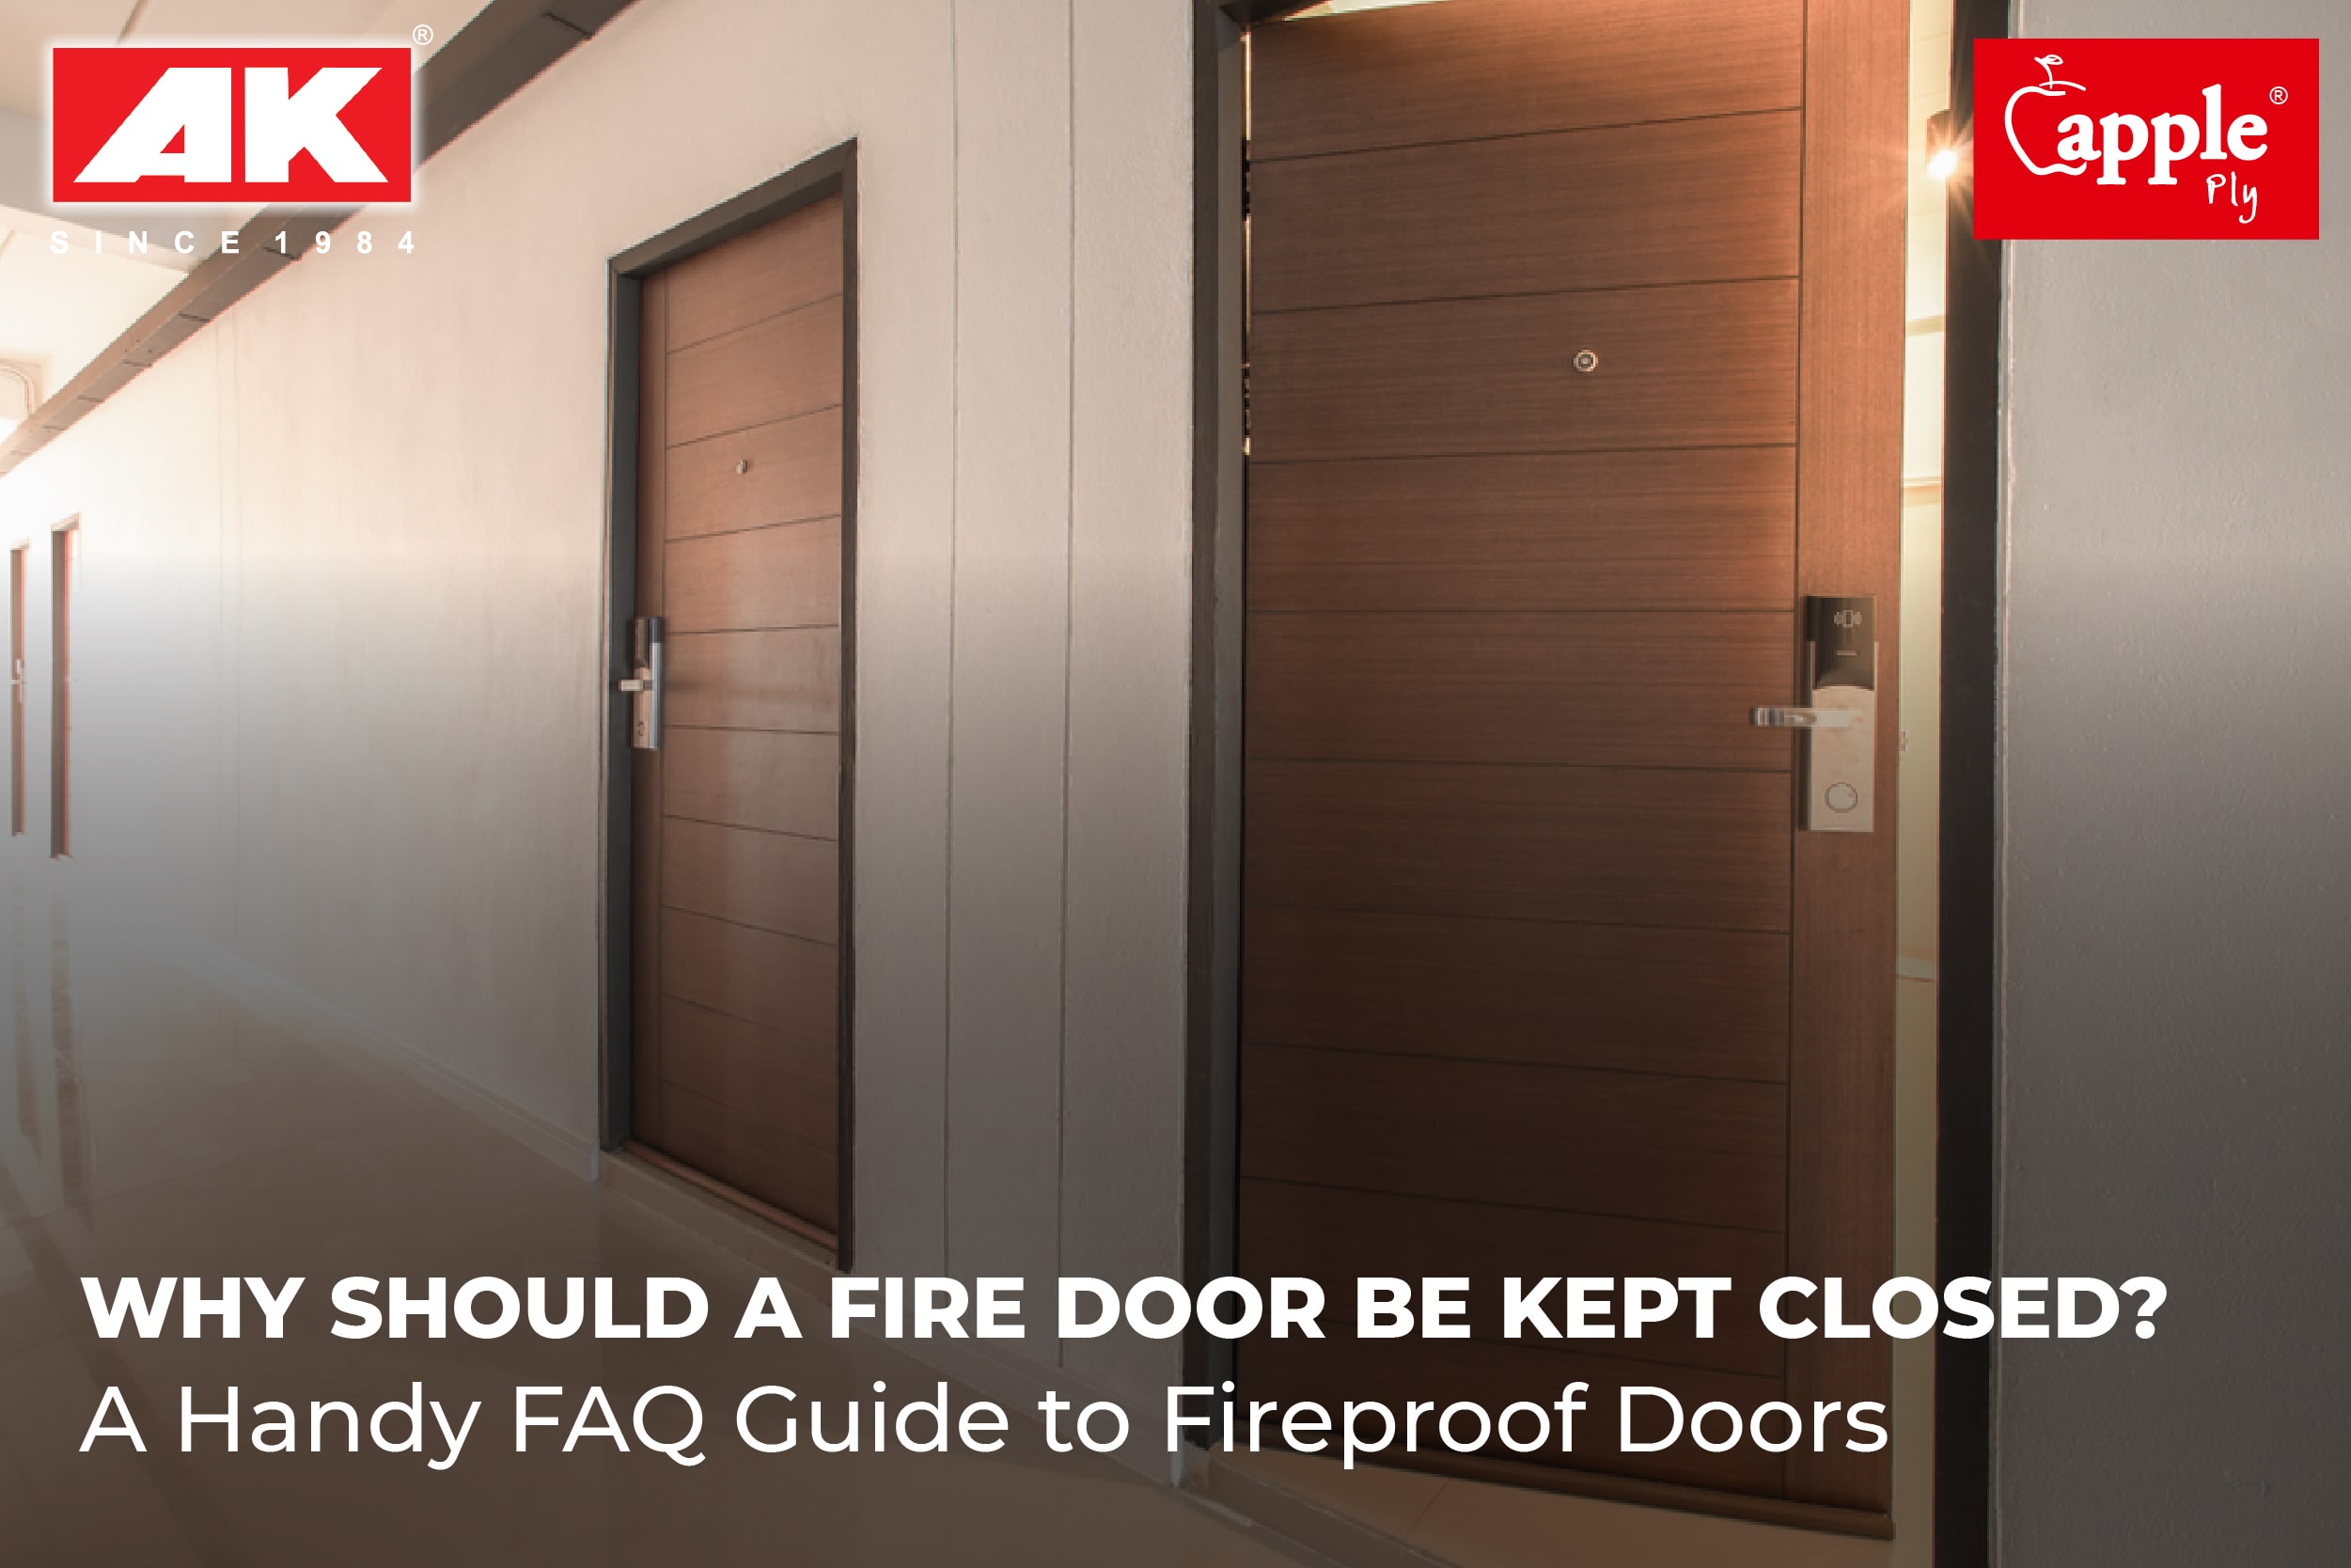 Why Should a Fire Door Be Kept Closed?